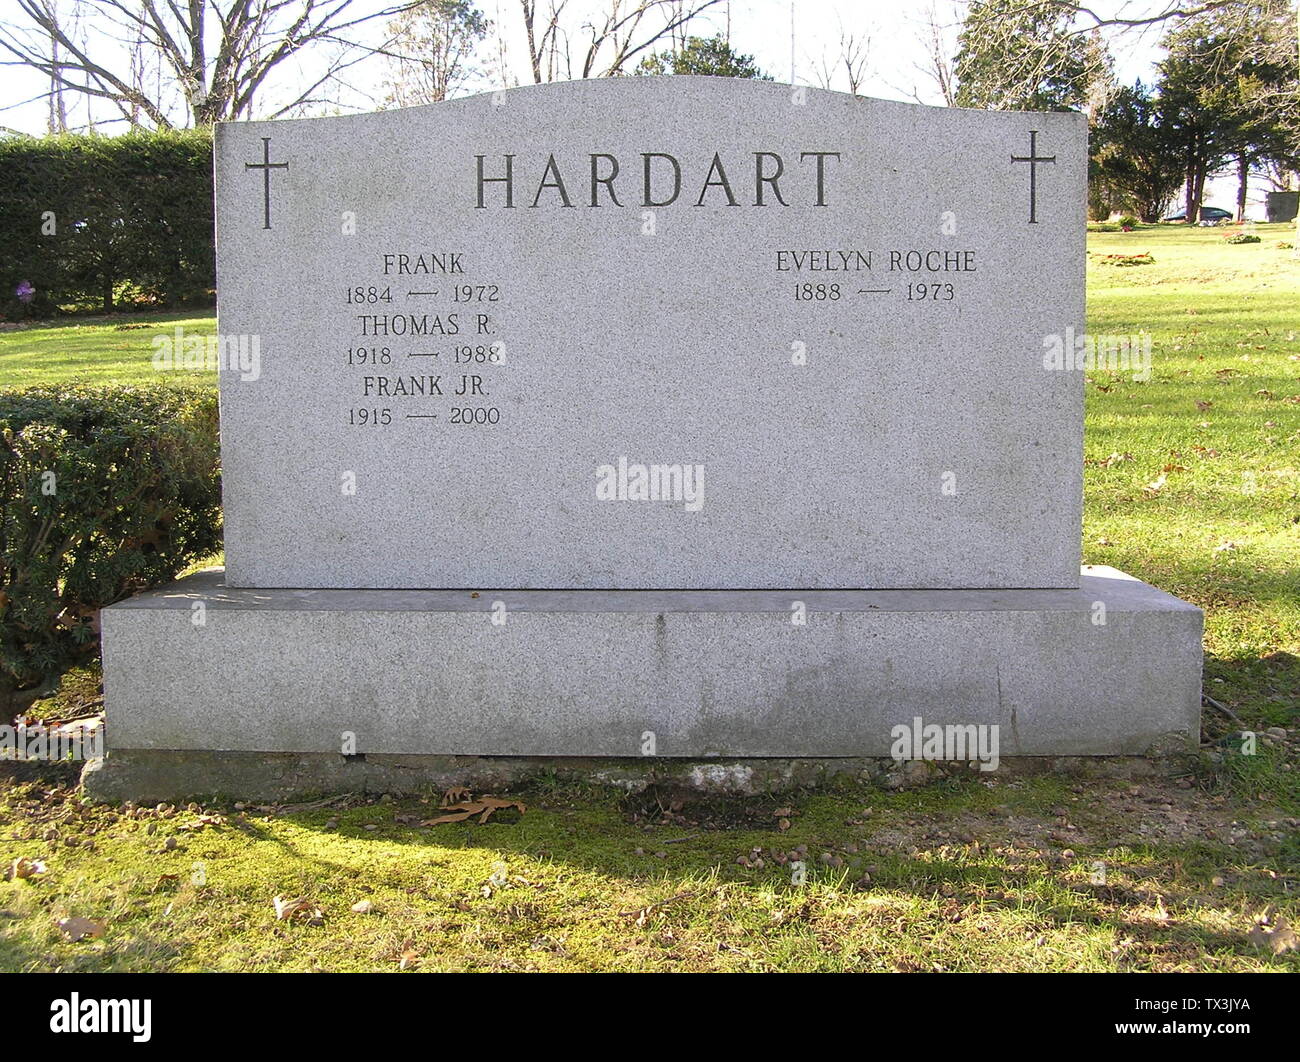 I took this photograph of the grave of Frank Hardart in Gate of Heaven  Cemetery. This is the grave of the son of Horn and Hardart co-founder Frank  Hardart.; 7 September 2007 (